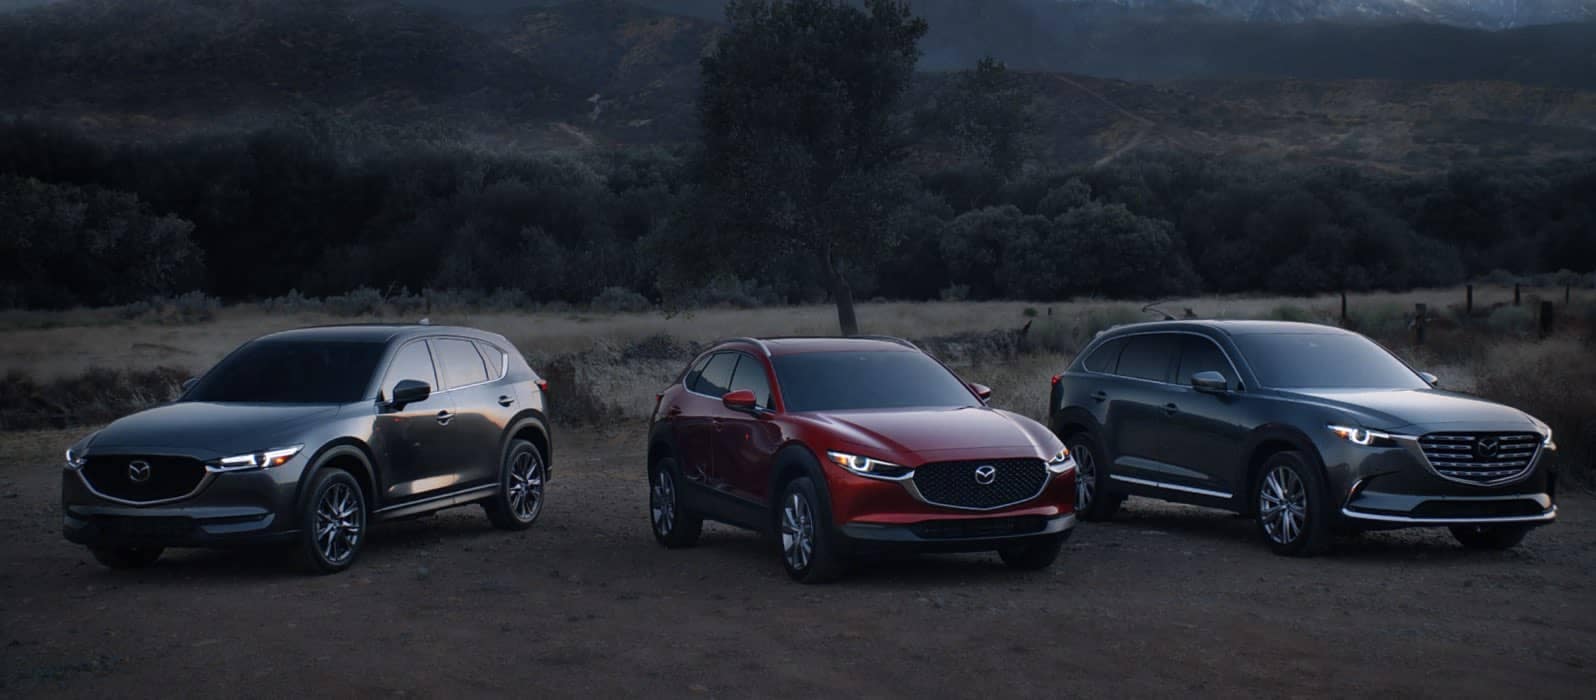 2021 Mazda lineup with forest